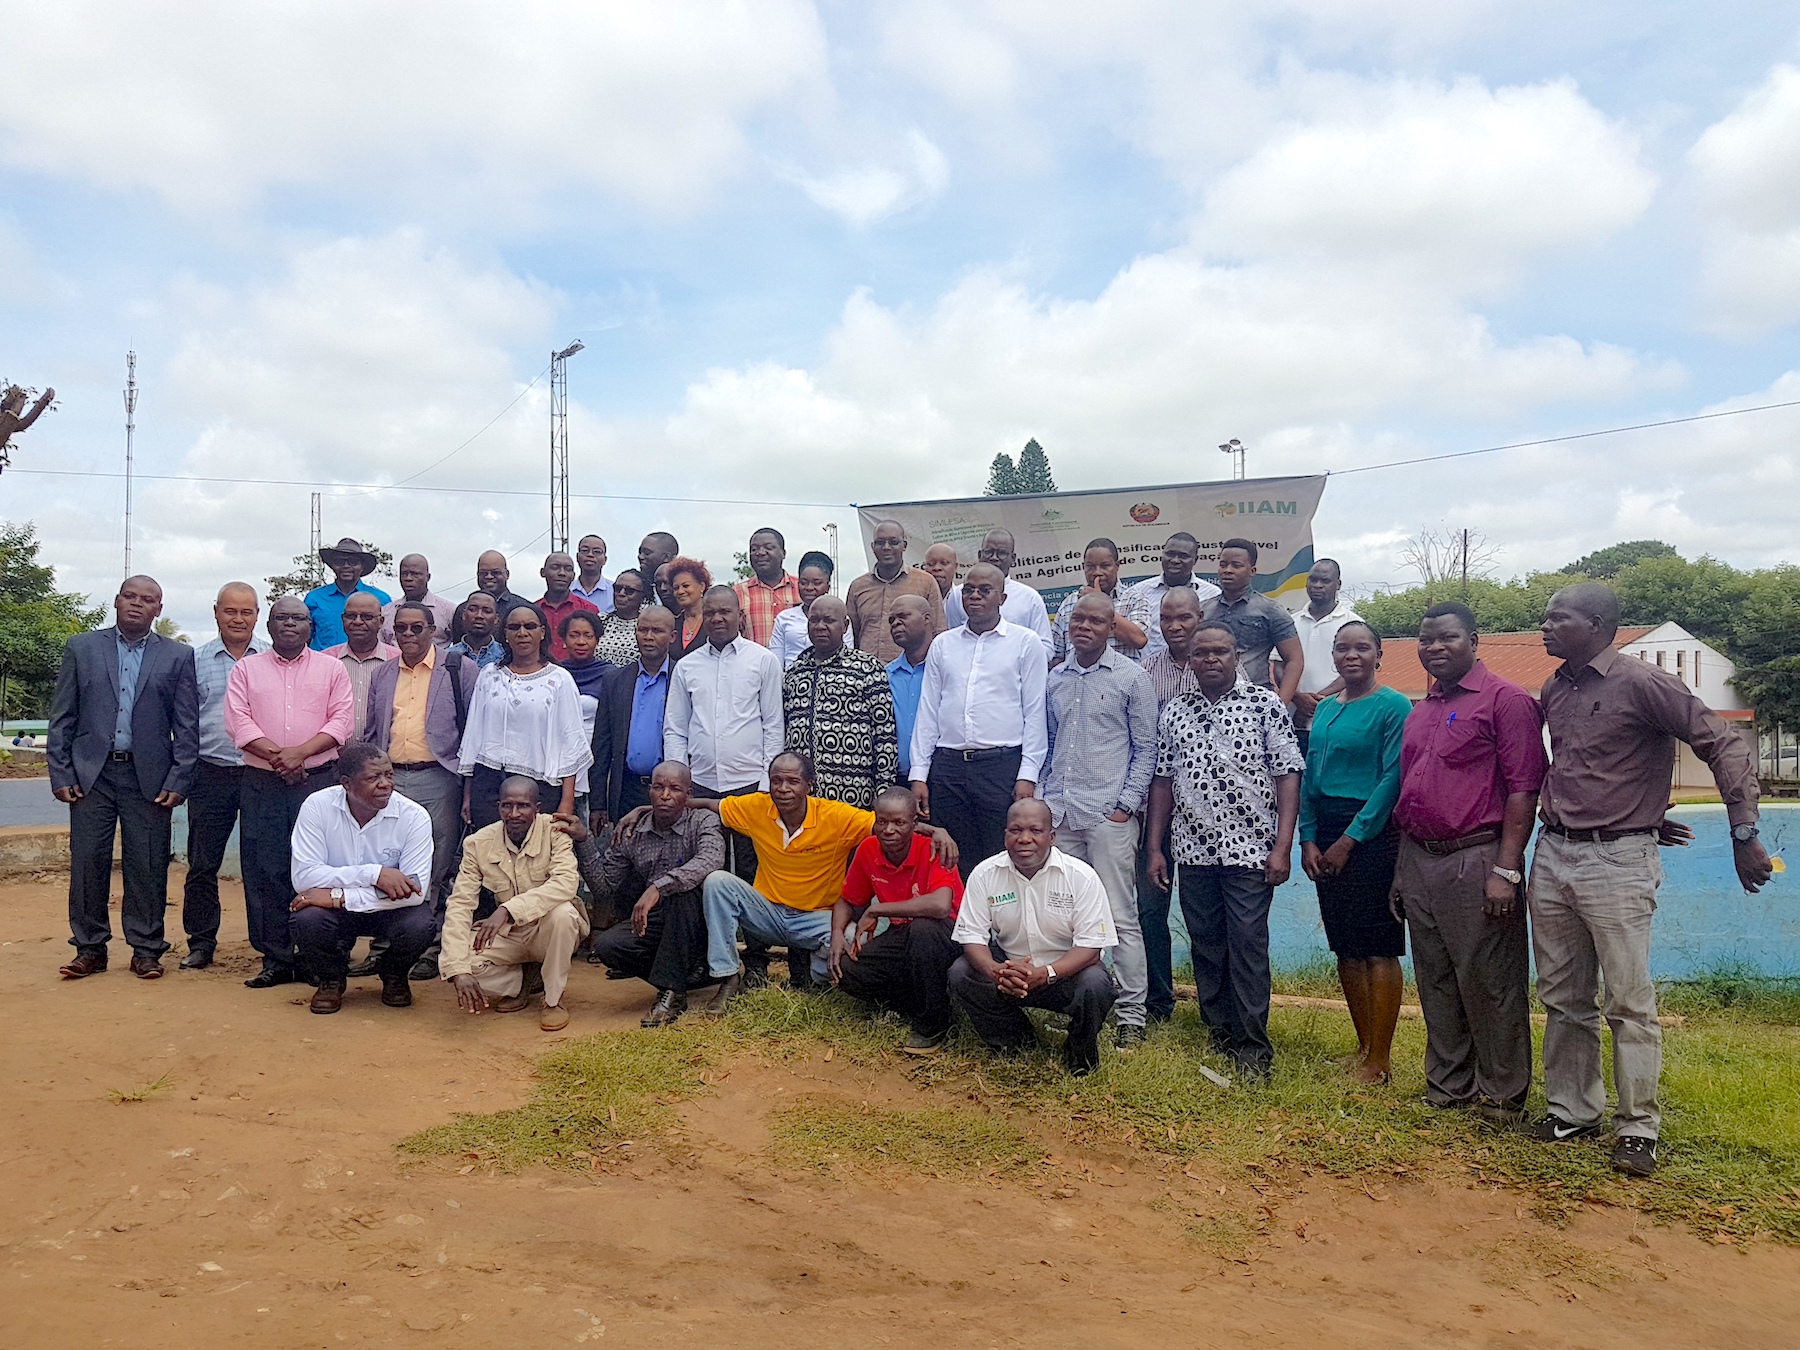 Participants of the SIMLESA policy forum in Chimoio, Manica province, Mozambique, pose for a group photo. 